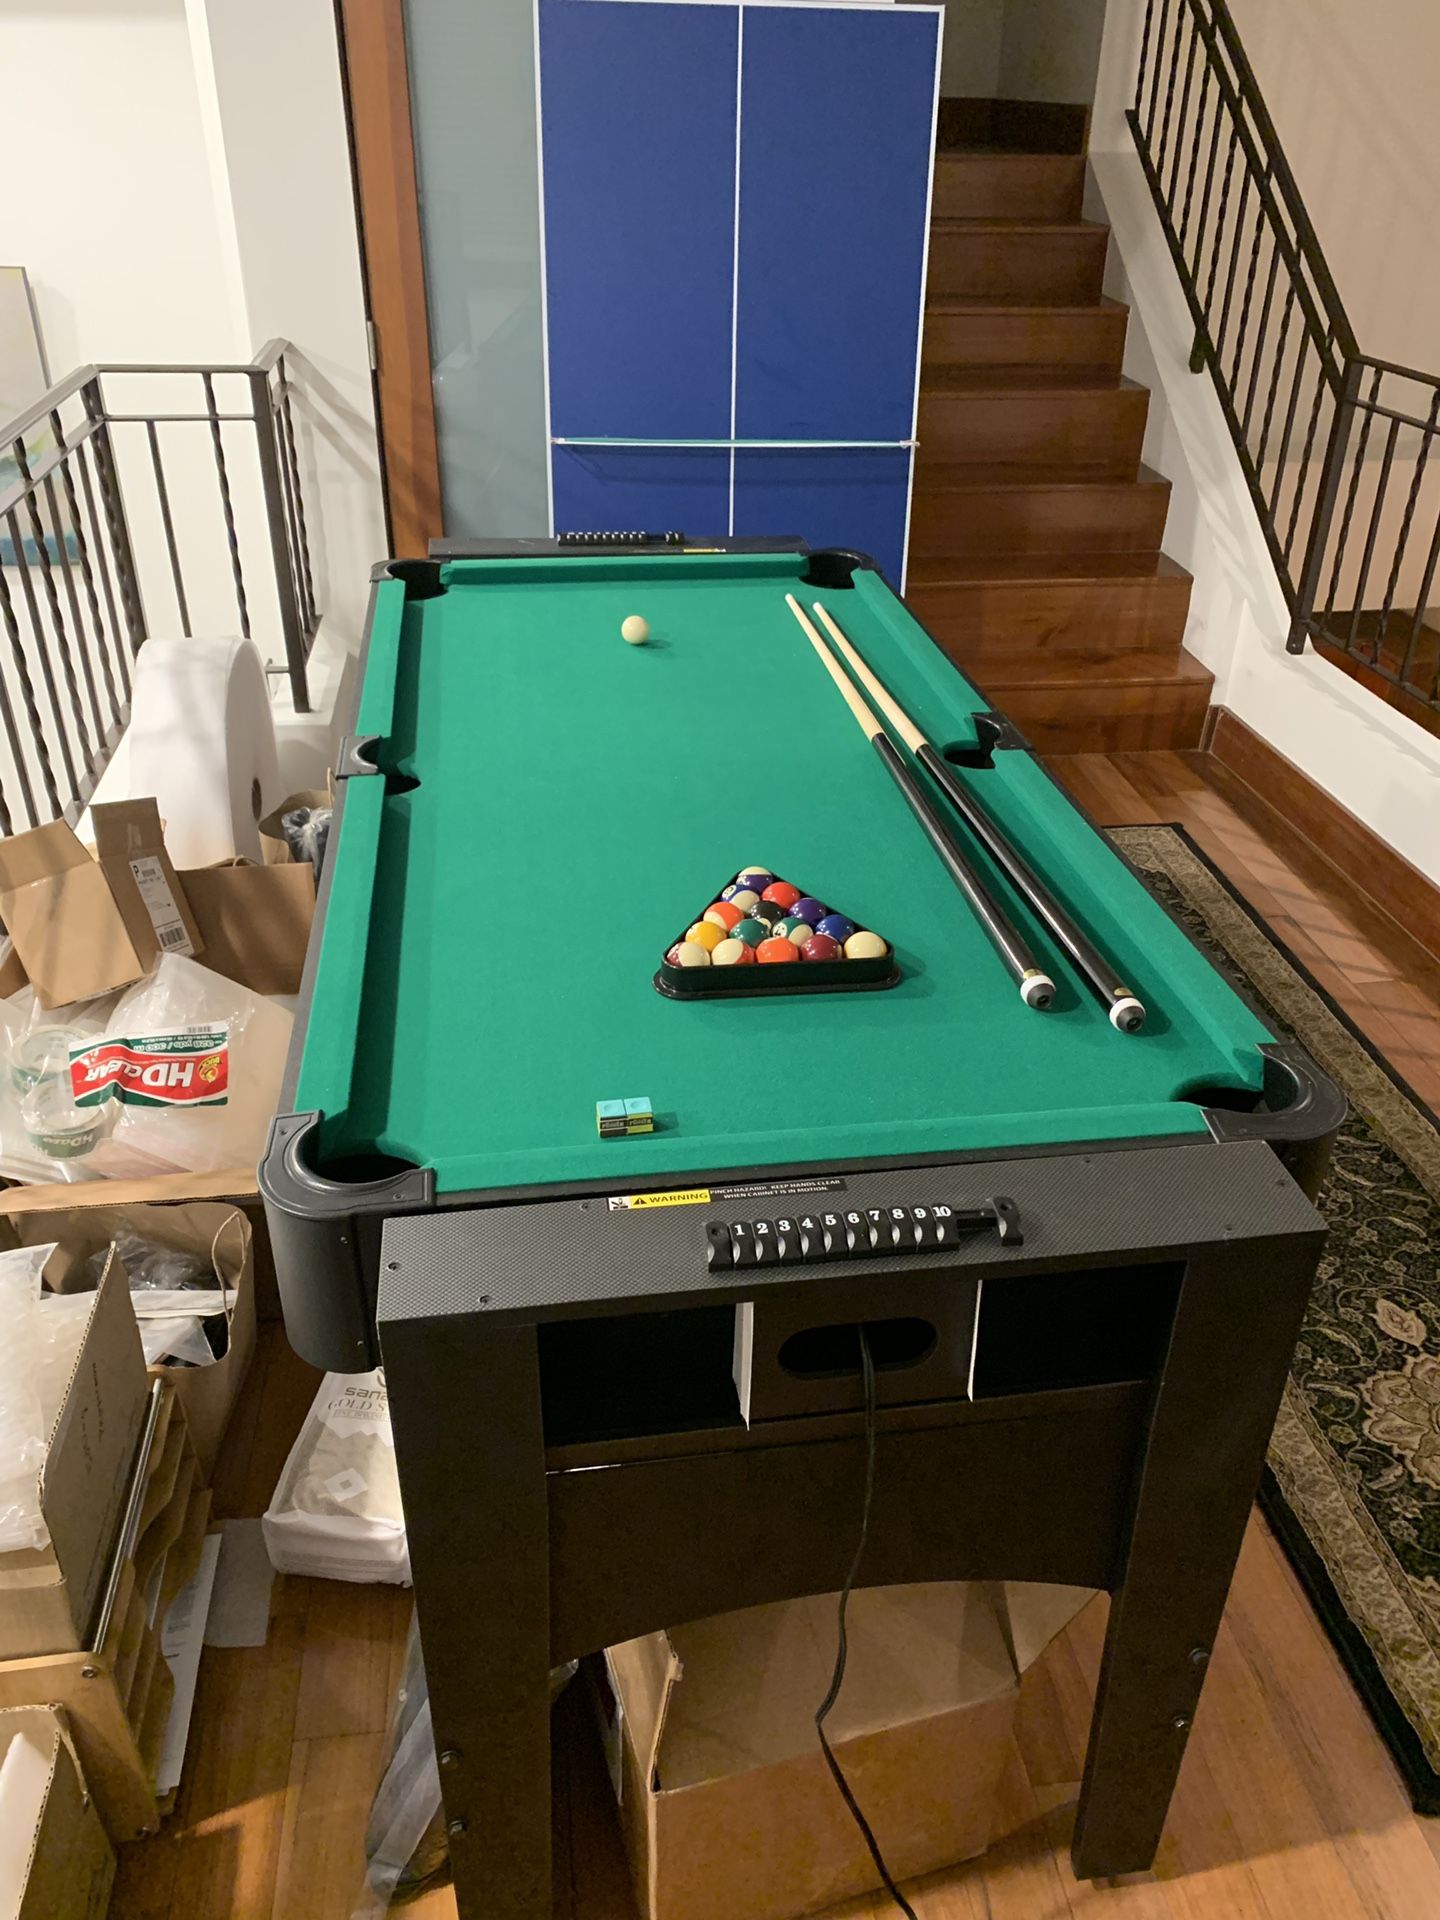 3 in 1 game table- Pool, Air Hockey, Ping Pong (excellent condition... only used a couple times)